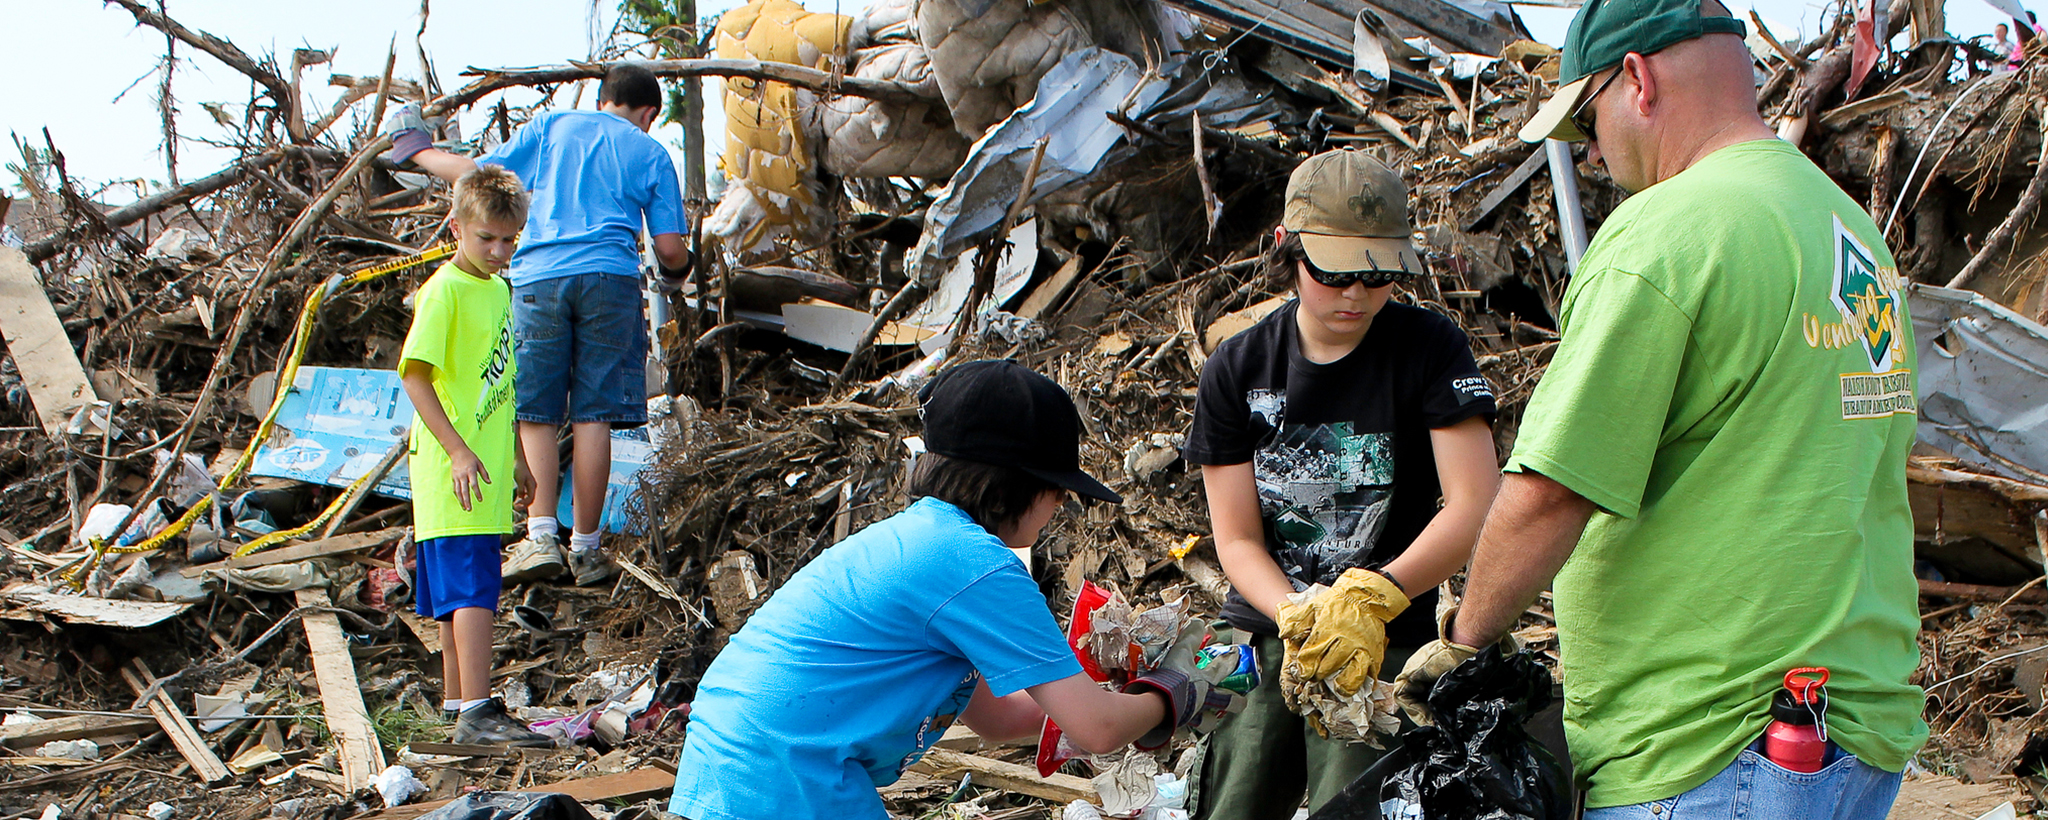 Four boy scouts with their leader engaging in a debris clean up while wearing gloves and other protective gear